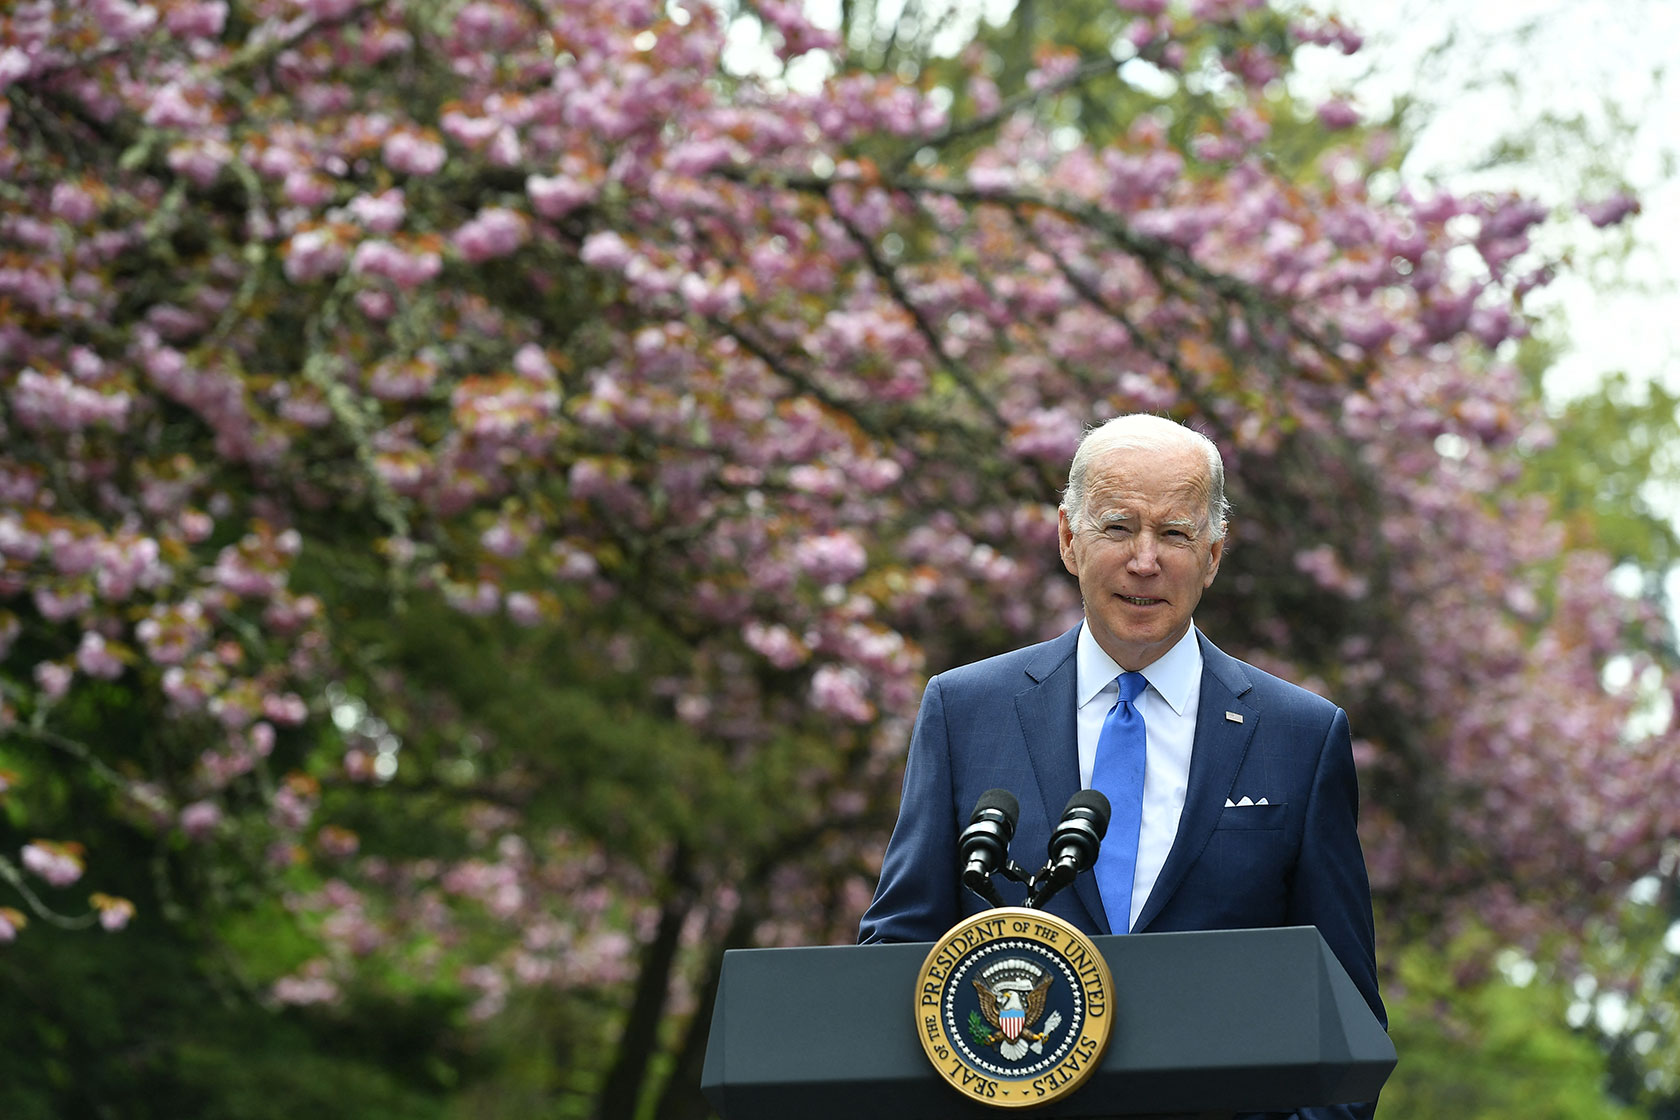 Photo shows Biden standing in front of a podium with a pink flowering tree in the background